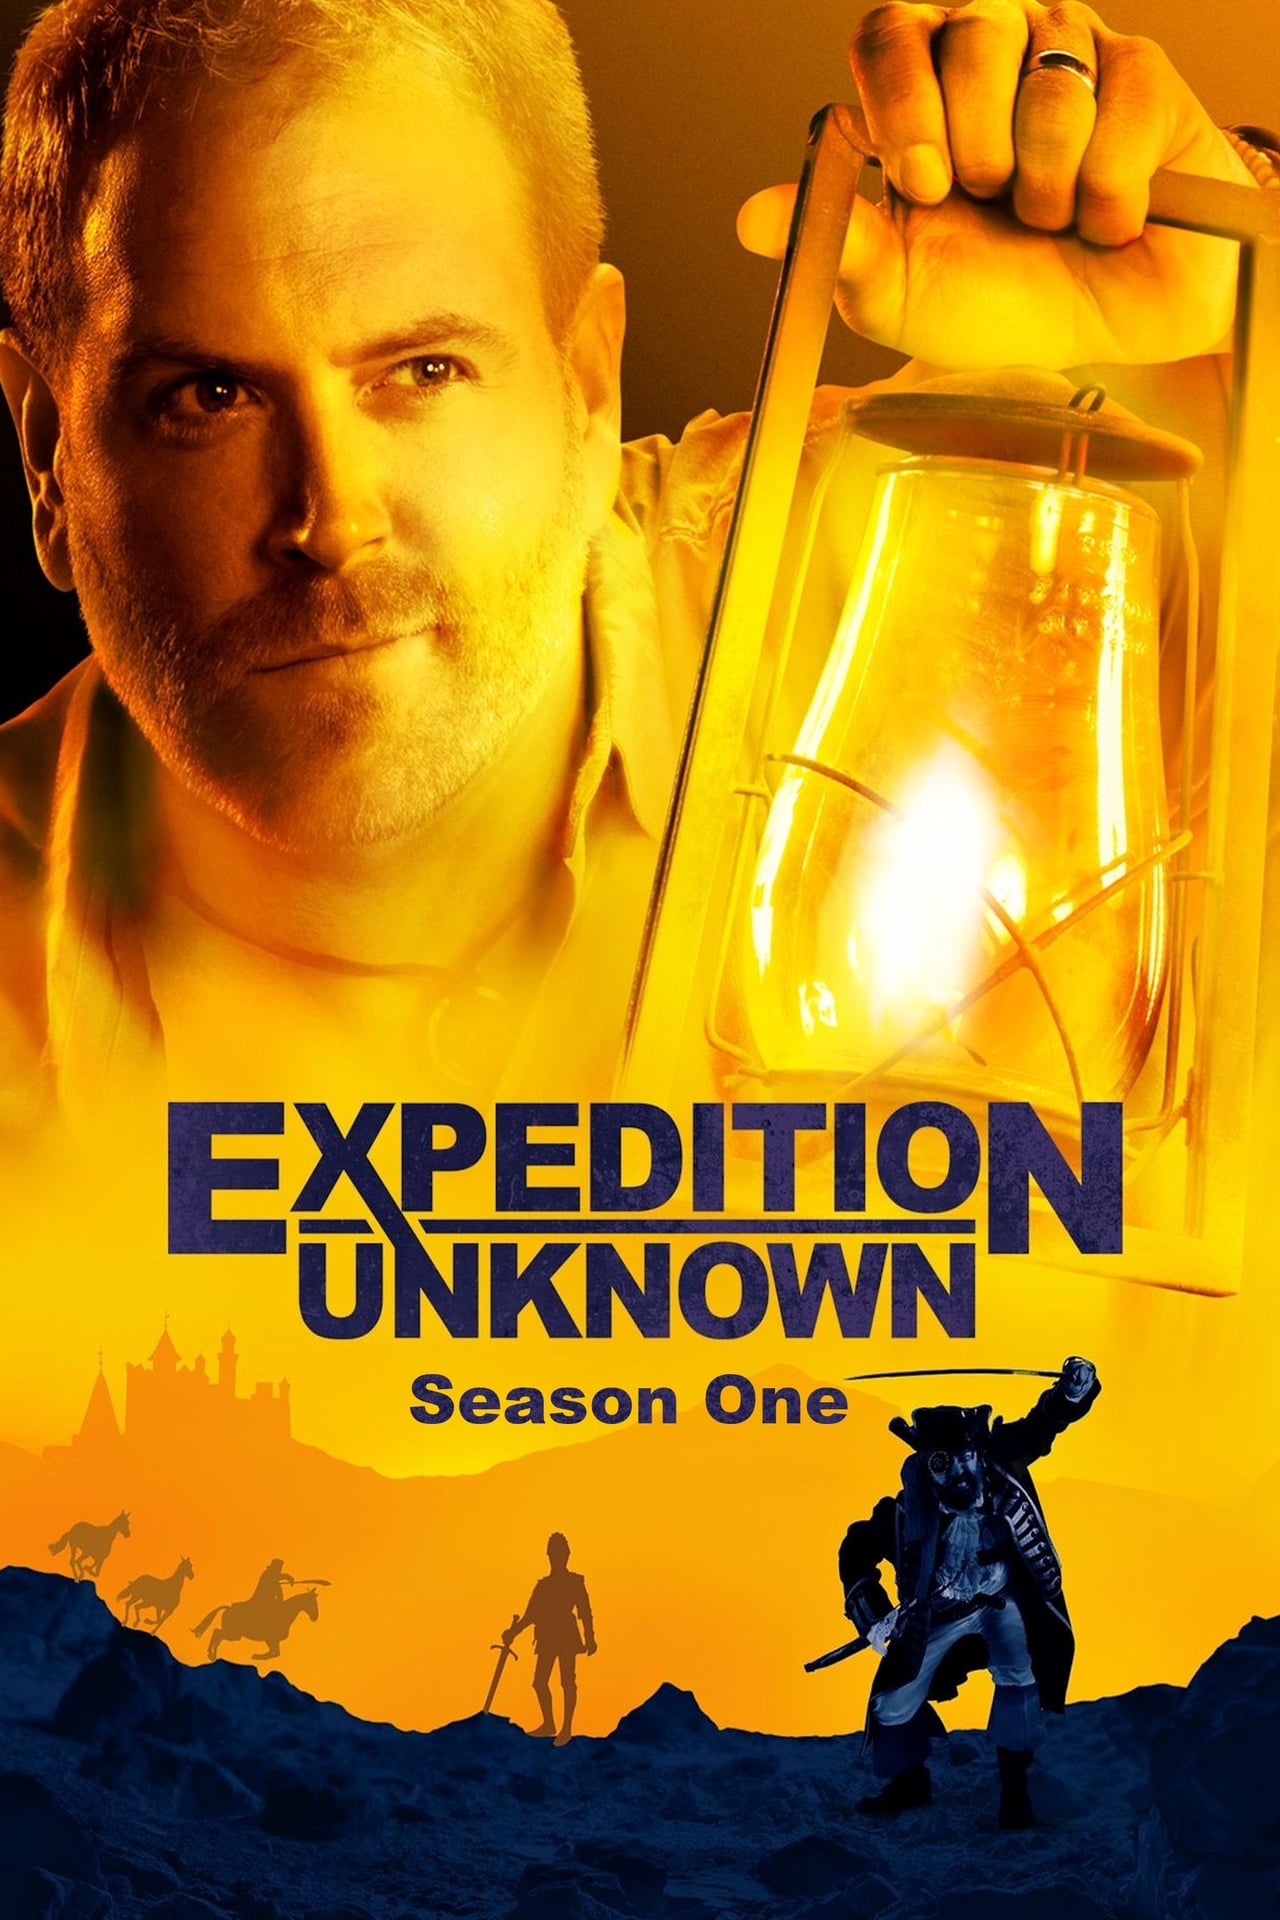 Expedition Unknown Season 1